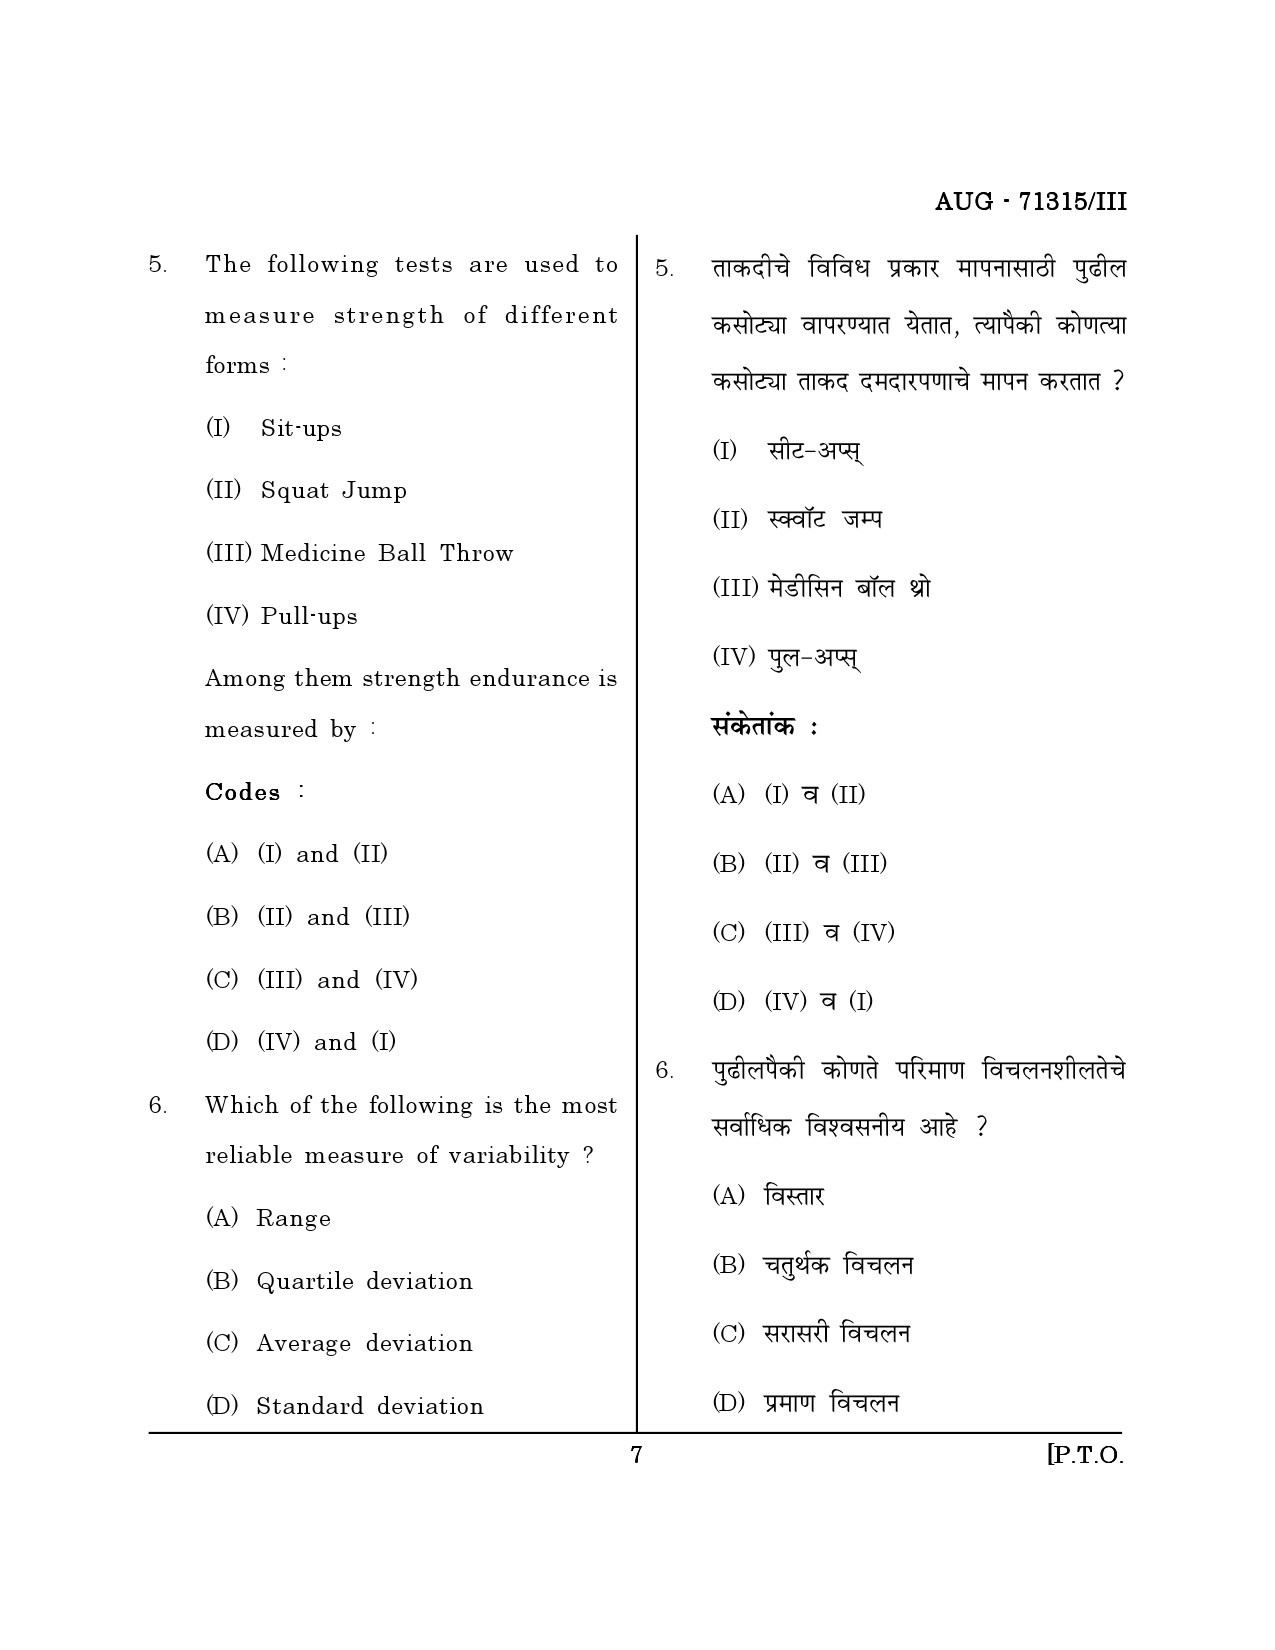 Maharashtra SET Physical Education Question Paper III August 2015 6